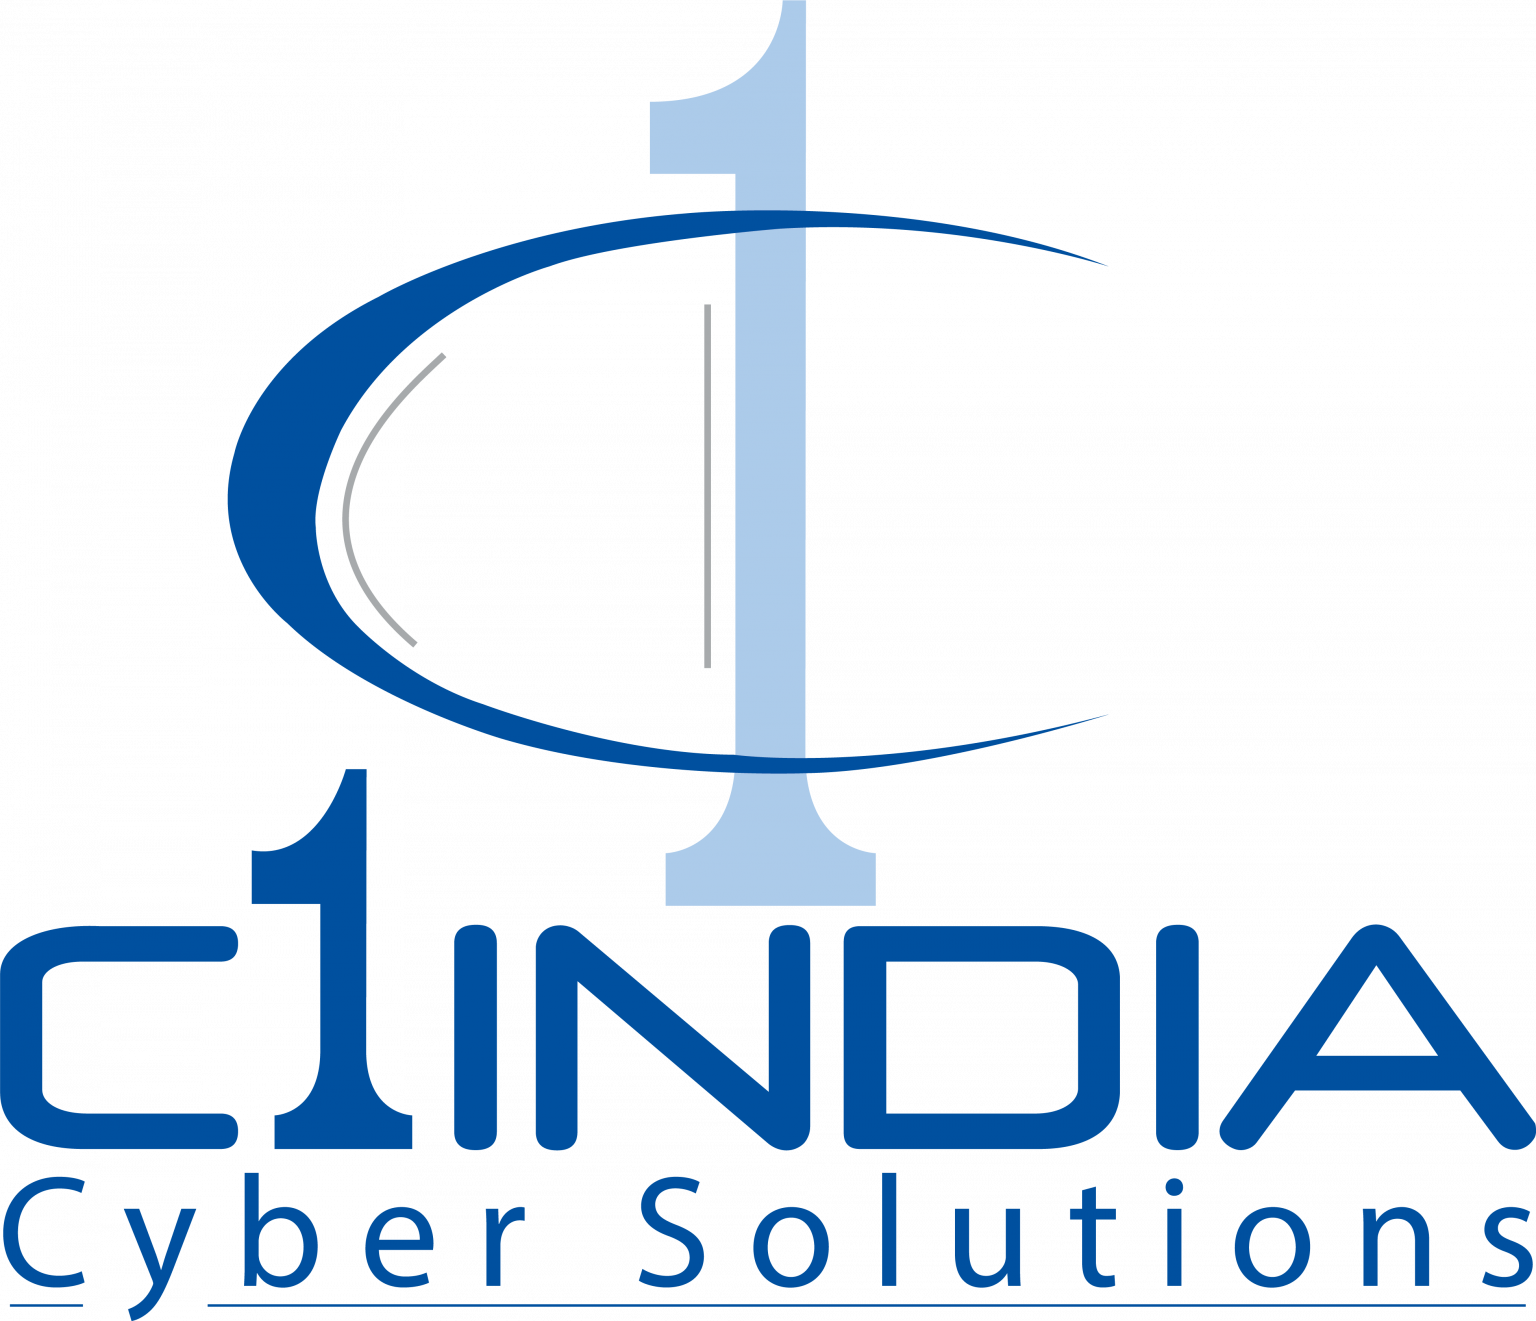 C1 Cyber Solutions